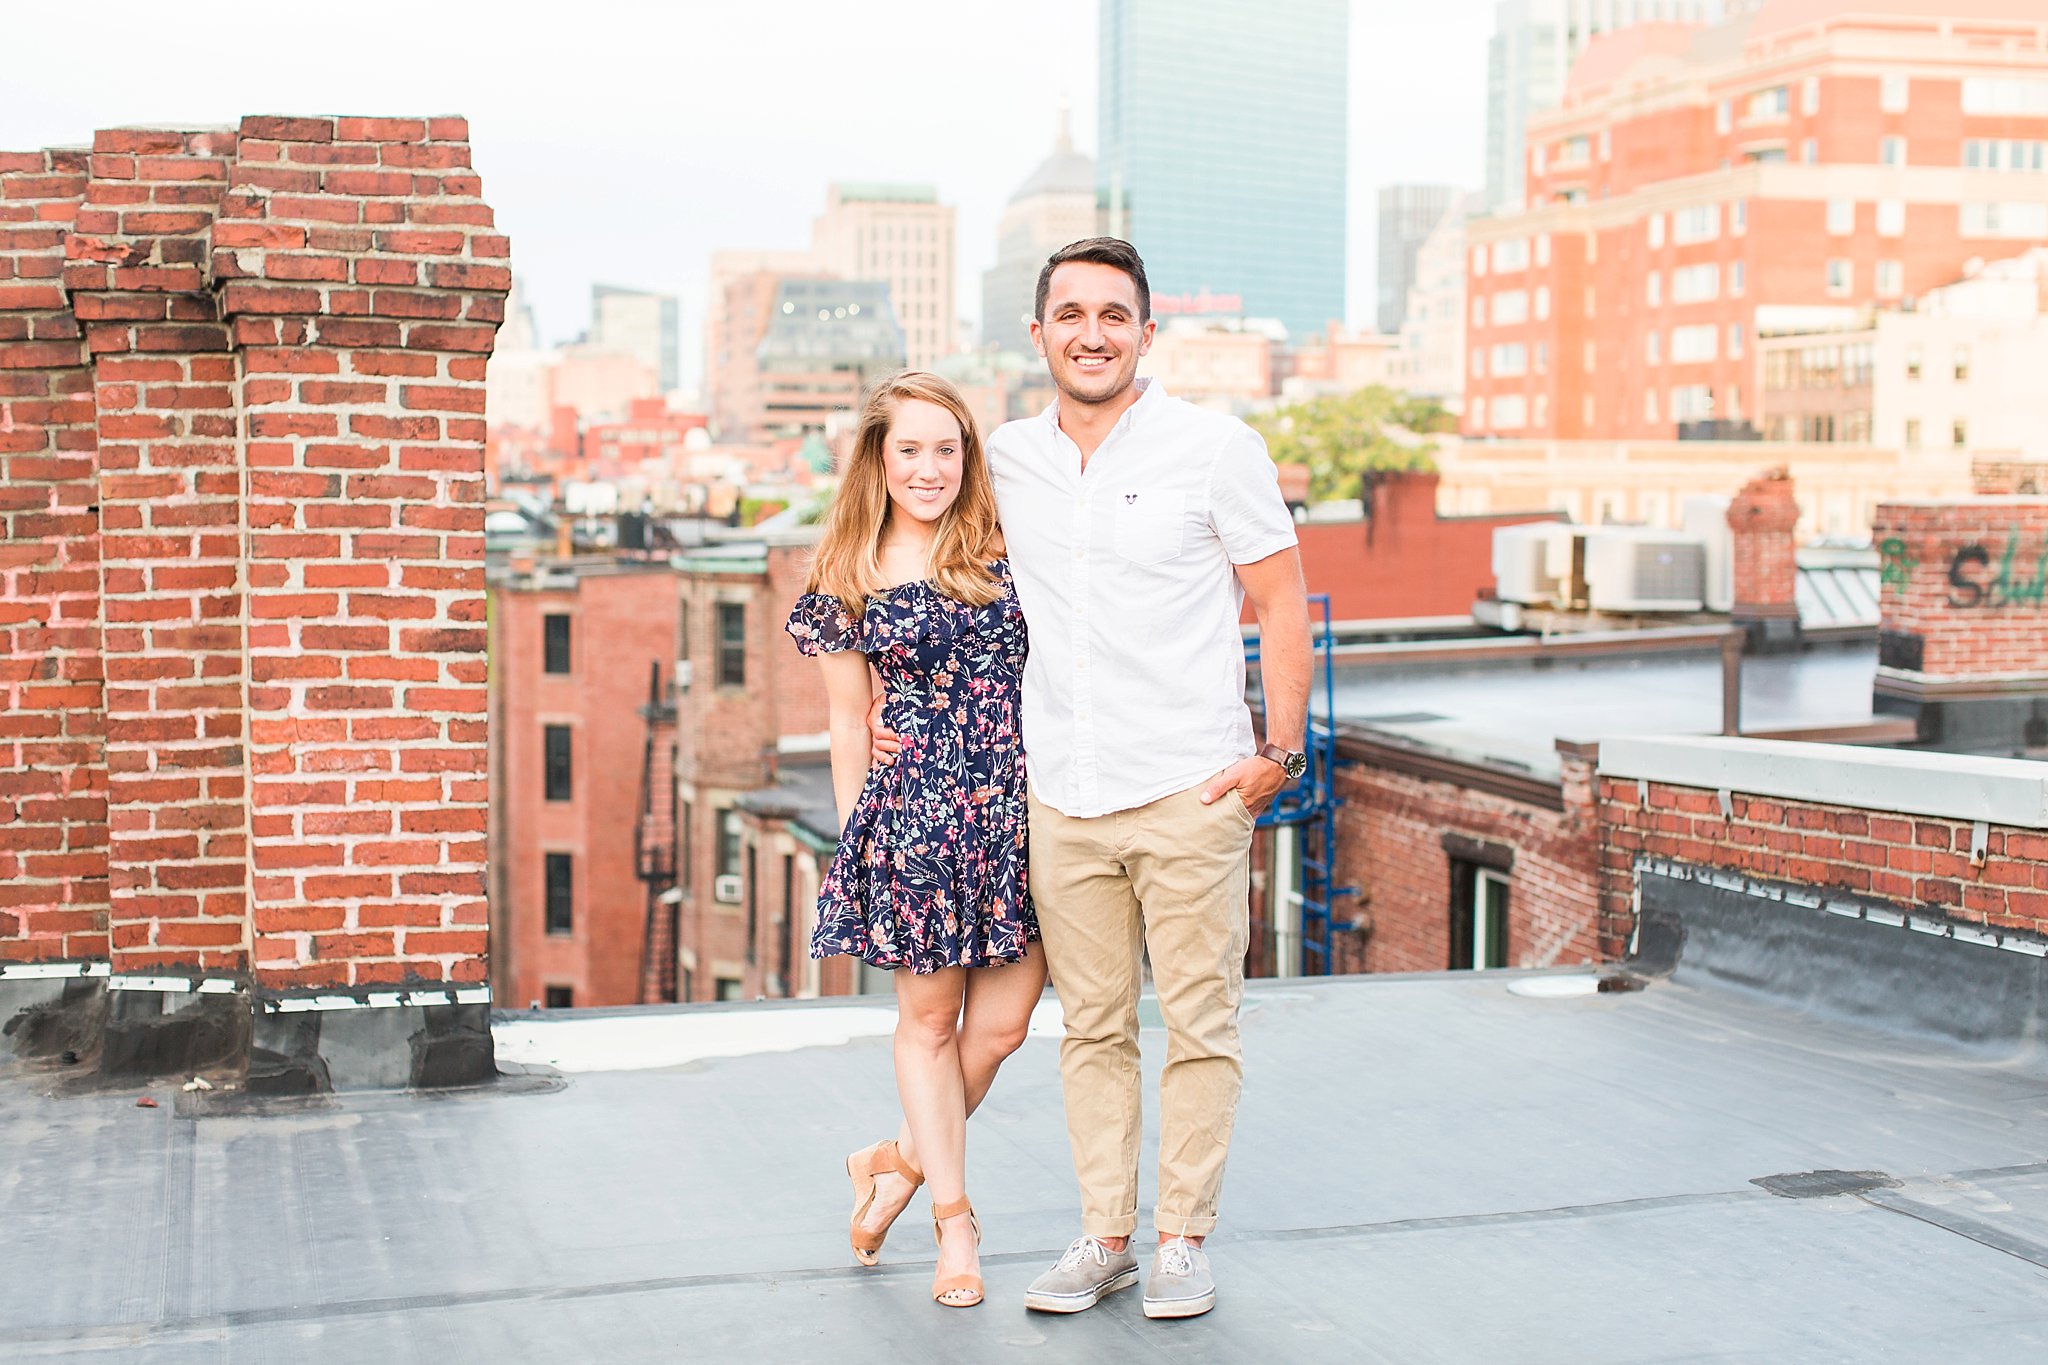 Boston rooftop dinner party